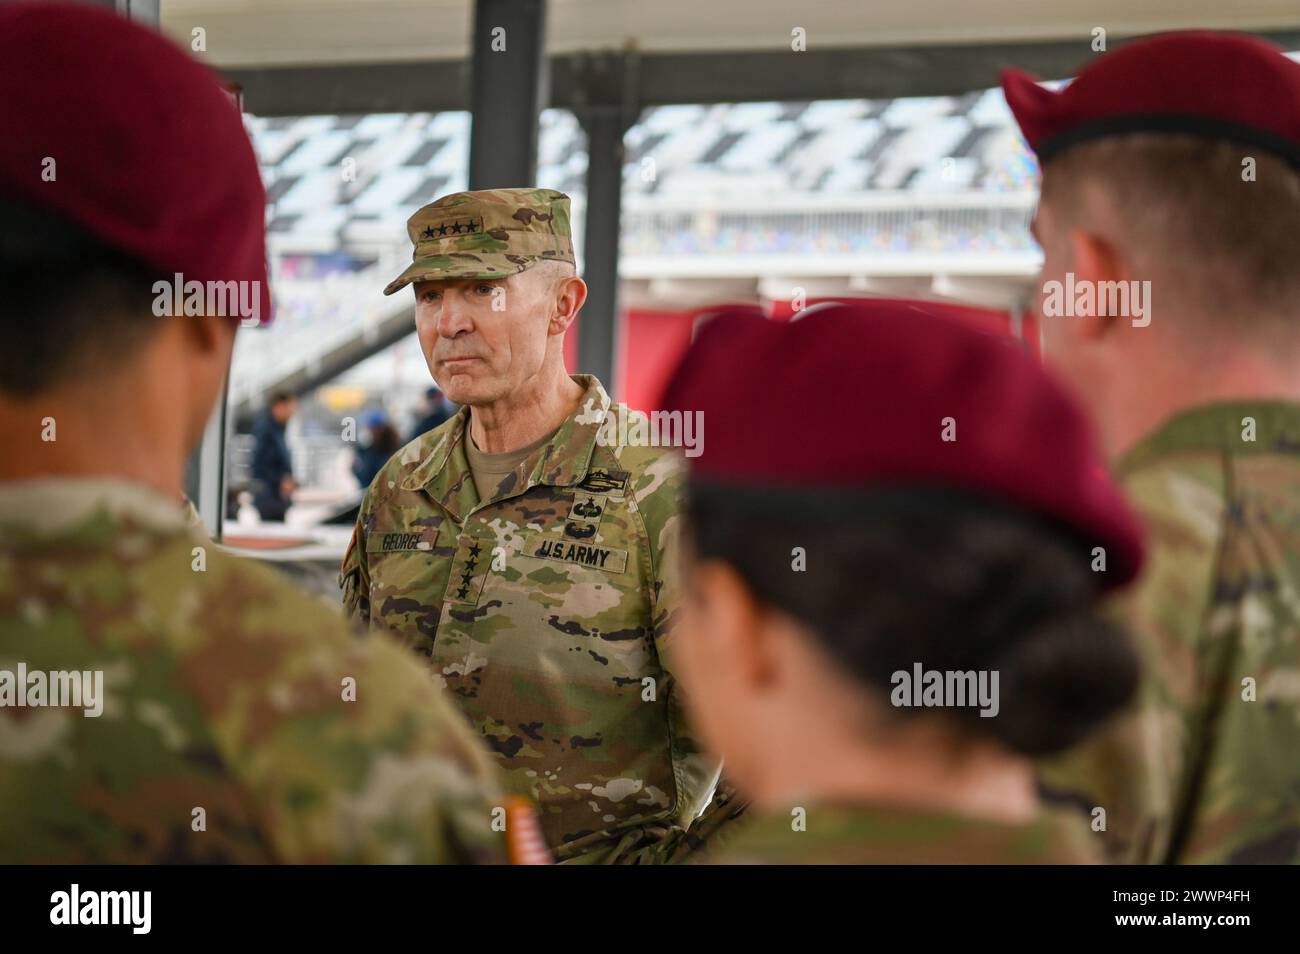 General Randy George, Chief of Staff of the Army, speaks with paratroopers from the U.S. Army 82nd Airborne Division 2nd Battalion, 505th Infantry Regiment during the 2024 NASCAR Daytona 500 in Daytona Beach, Fla., Sunday, Feb. 18, 2024. The Daytona 500 is a 500-mile-long NASCAR Cup Series motor race held annually and is regarded as the most important and prestigious race on the NASCAR calendar. Stock Photo